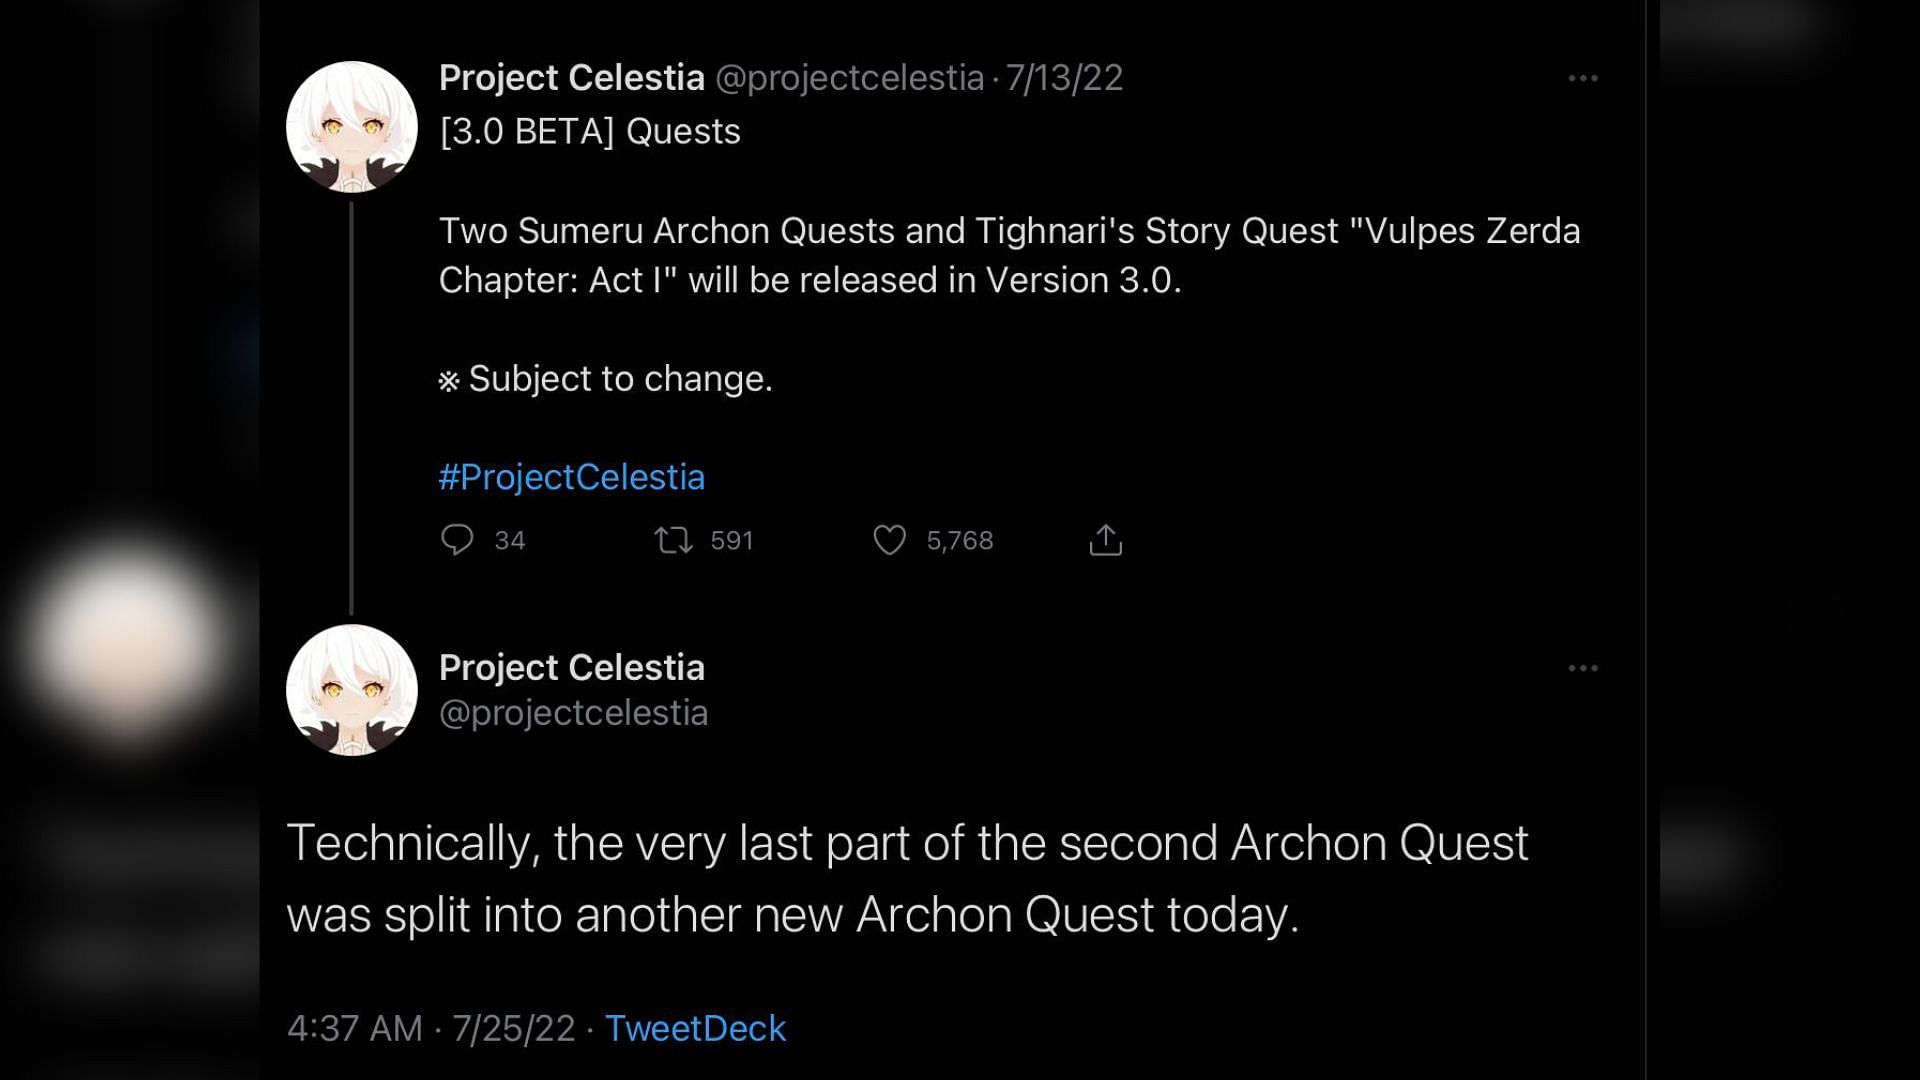 Changes made to Sumeru Archon Quest in Genshin Impact (Image via Twitter)